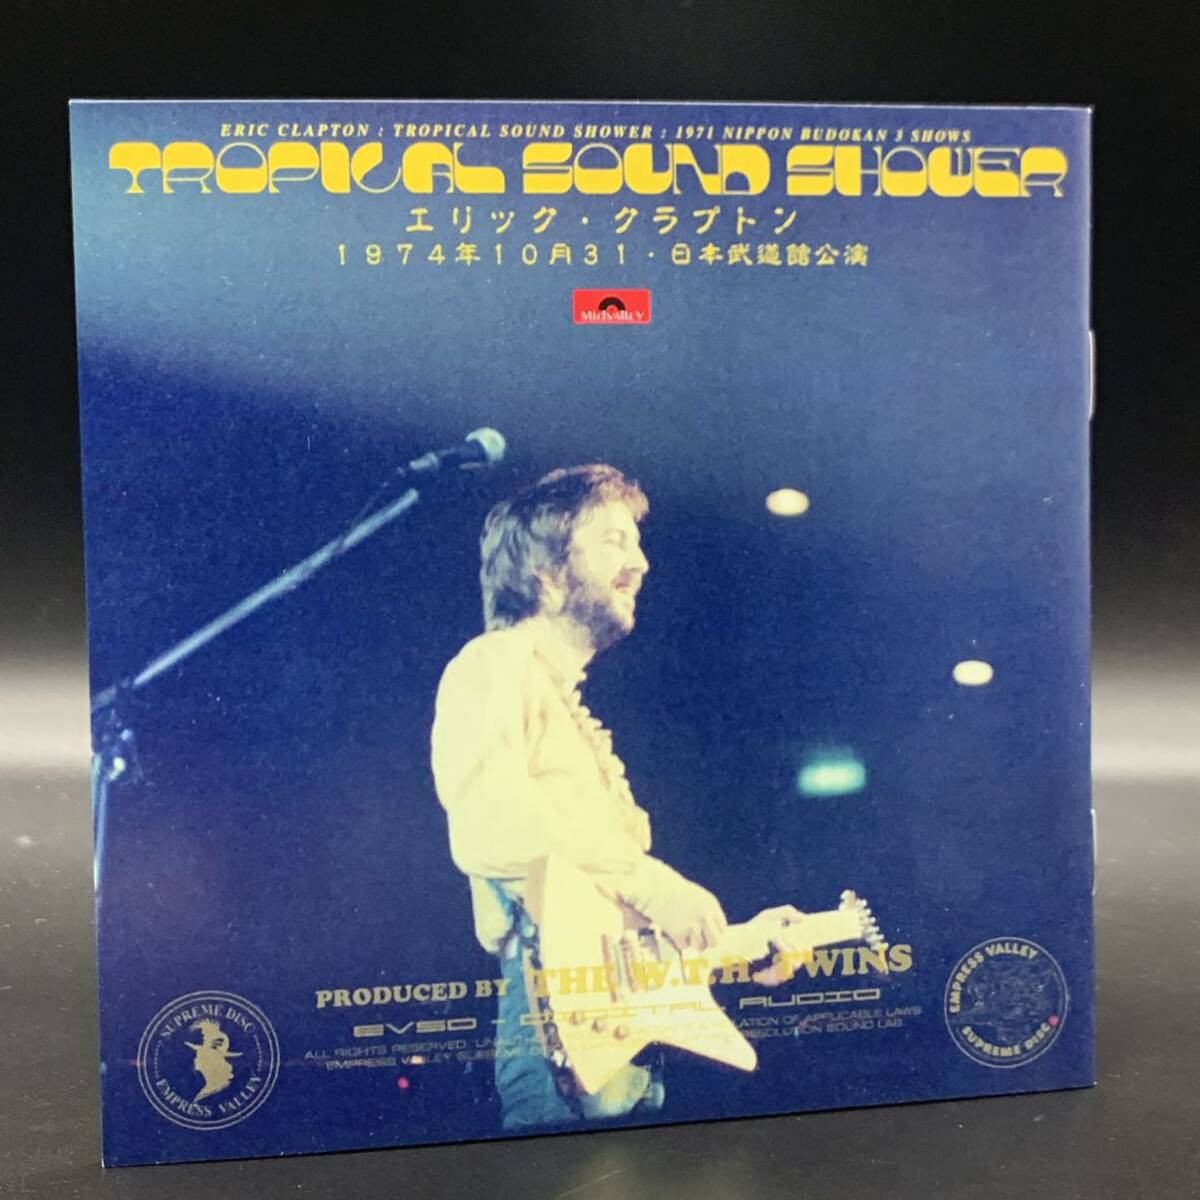 ERIC CLAPTON / TROPICAL SOUND SHOWER「亜熱帯武道館」(6CD BOX with Booklet) 初来日武道館3公演を全て初登場音源で収録した凄いやつ！の画像10